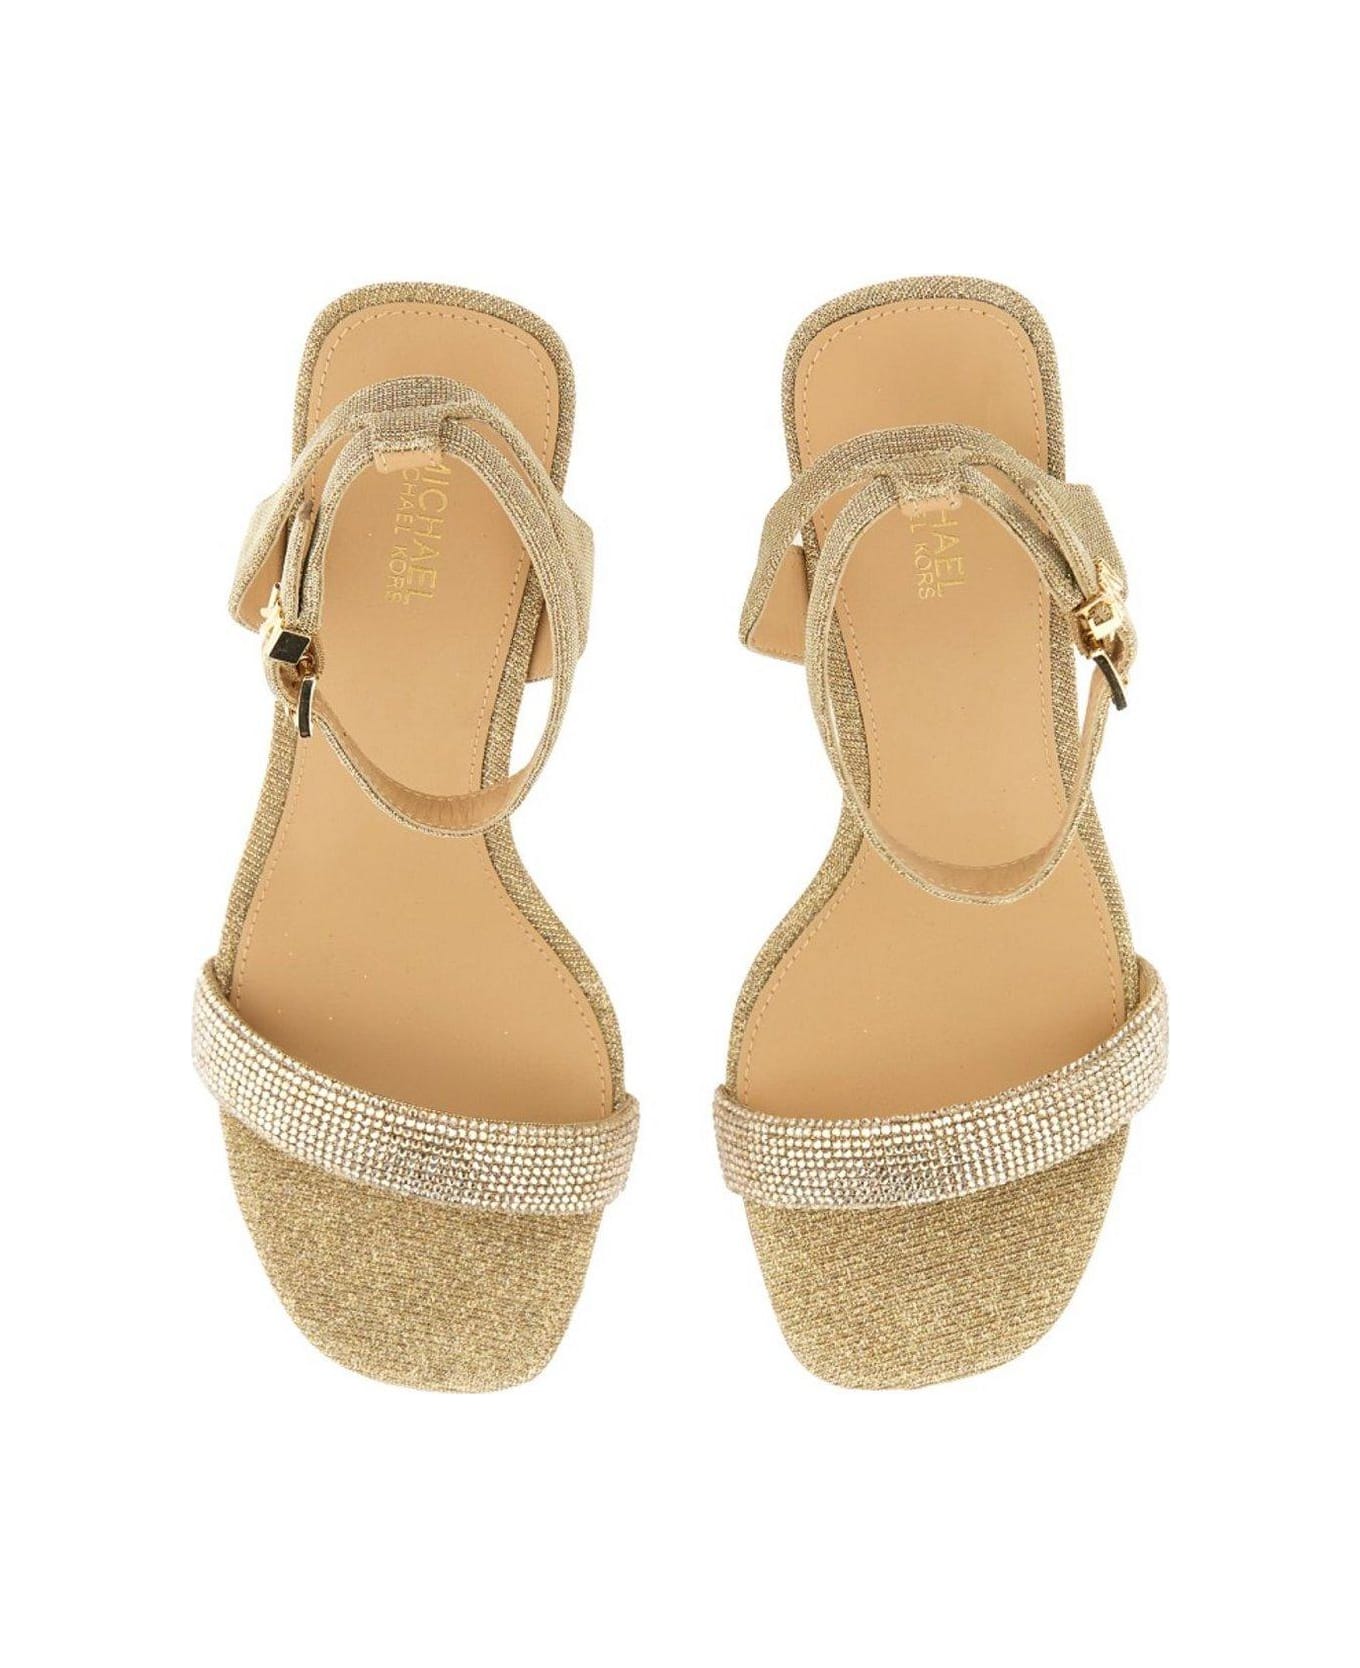 MICHAEL Michael Kors Carrie Rhinestoned Embellished Sandals - Pale Gold